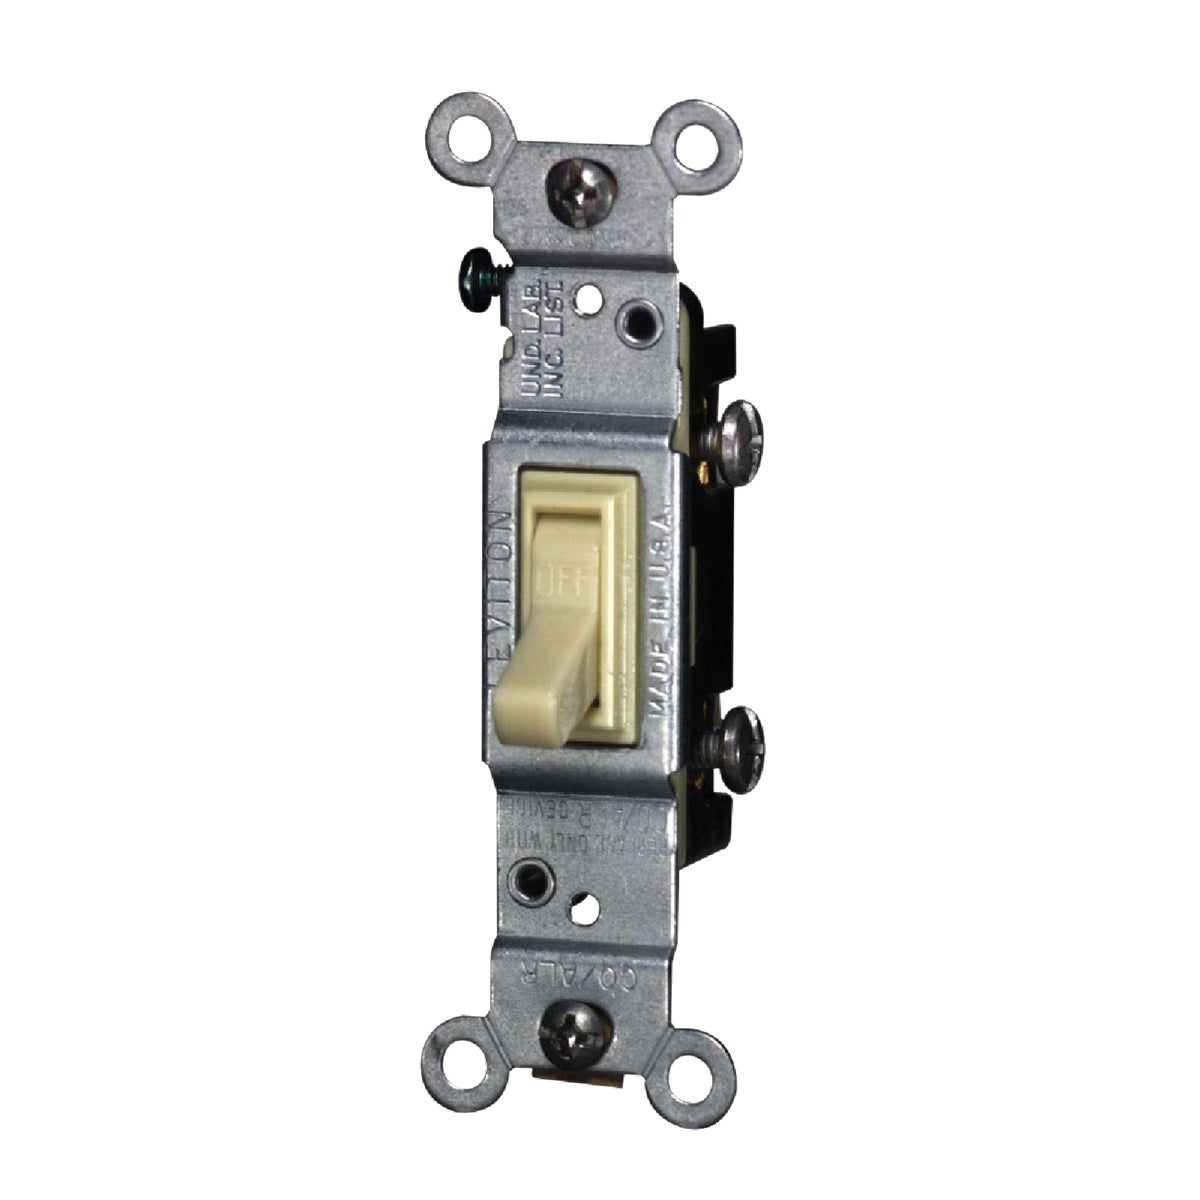 Item 508105, Quiet single pole switch ideal for controlling one fixture from a single 